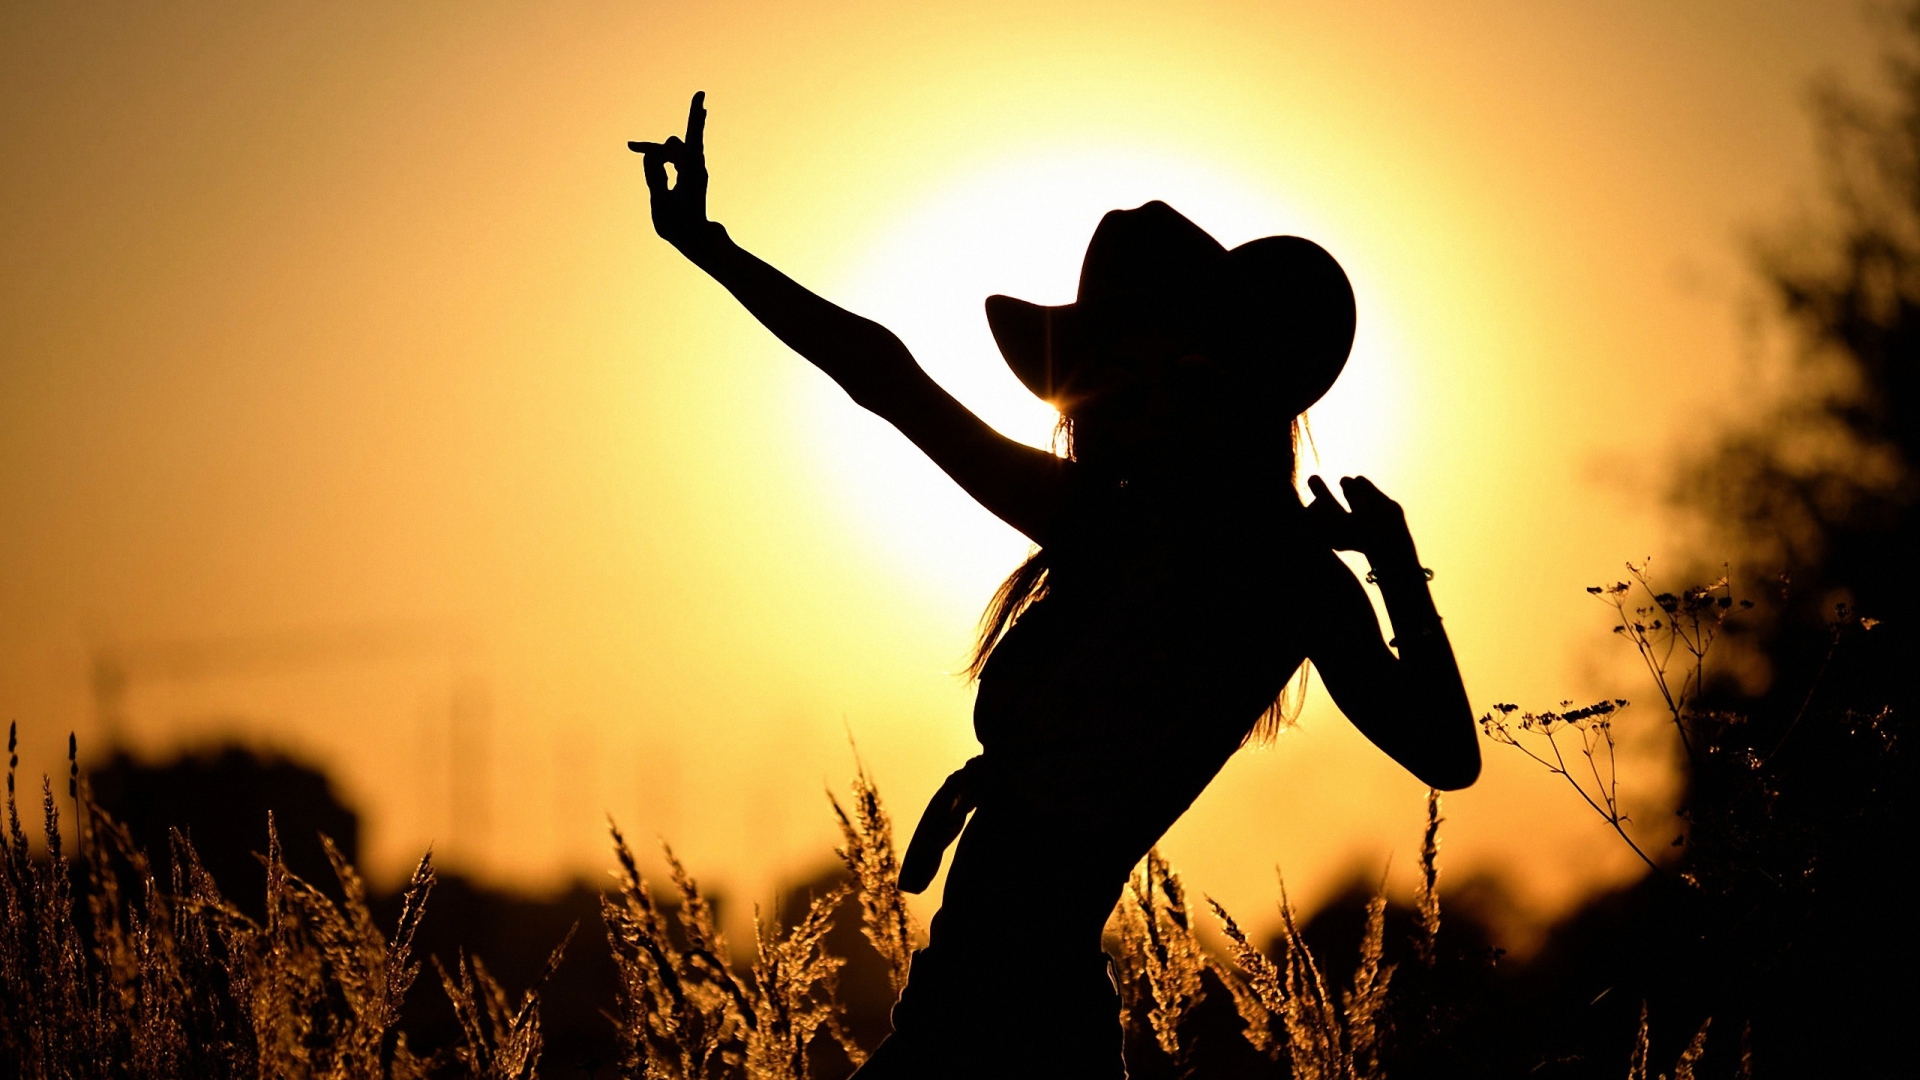 sunset, women, cowgirl, hat, silhouette